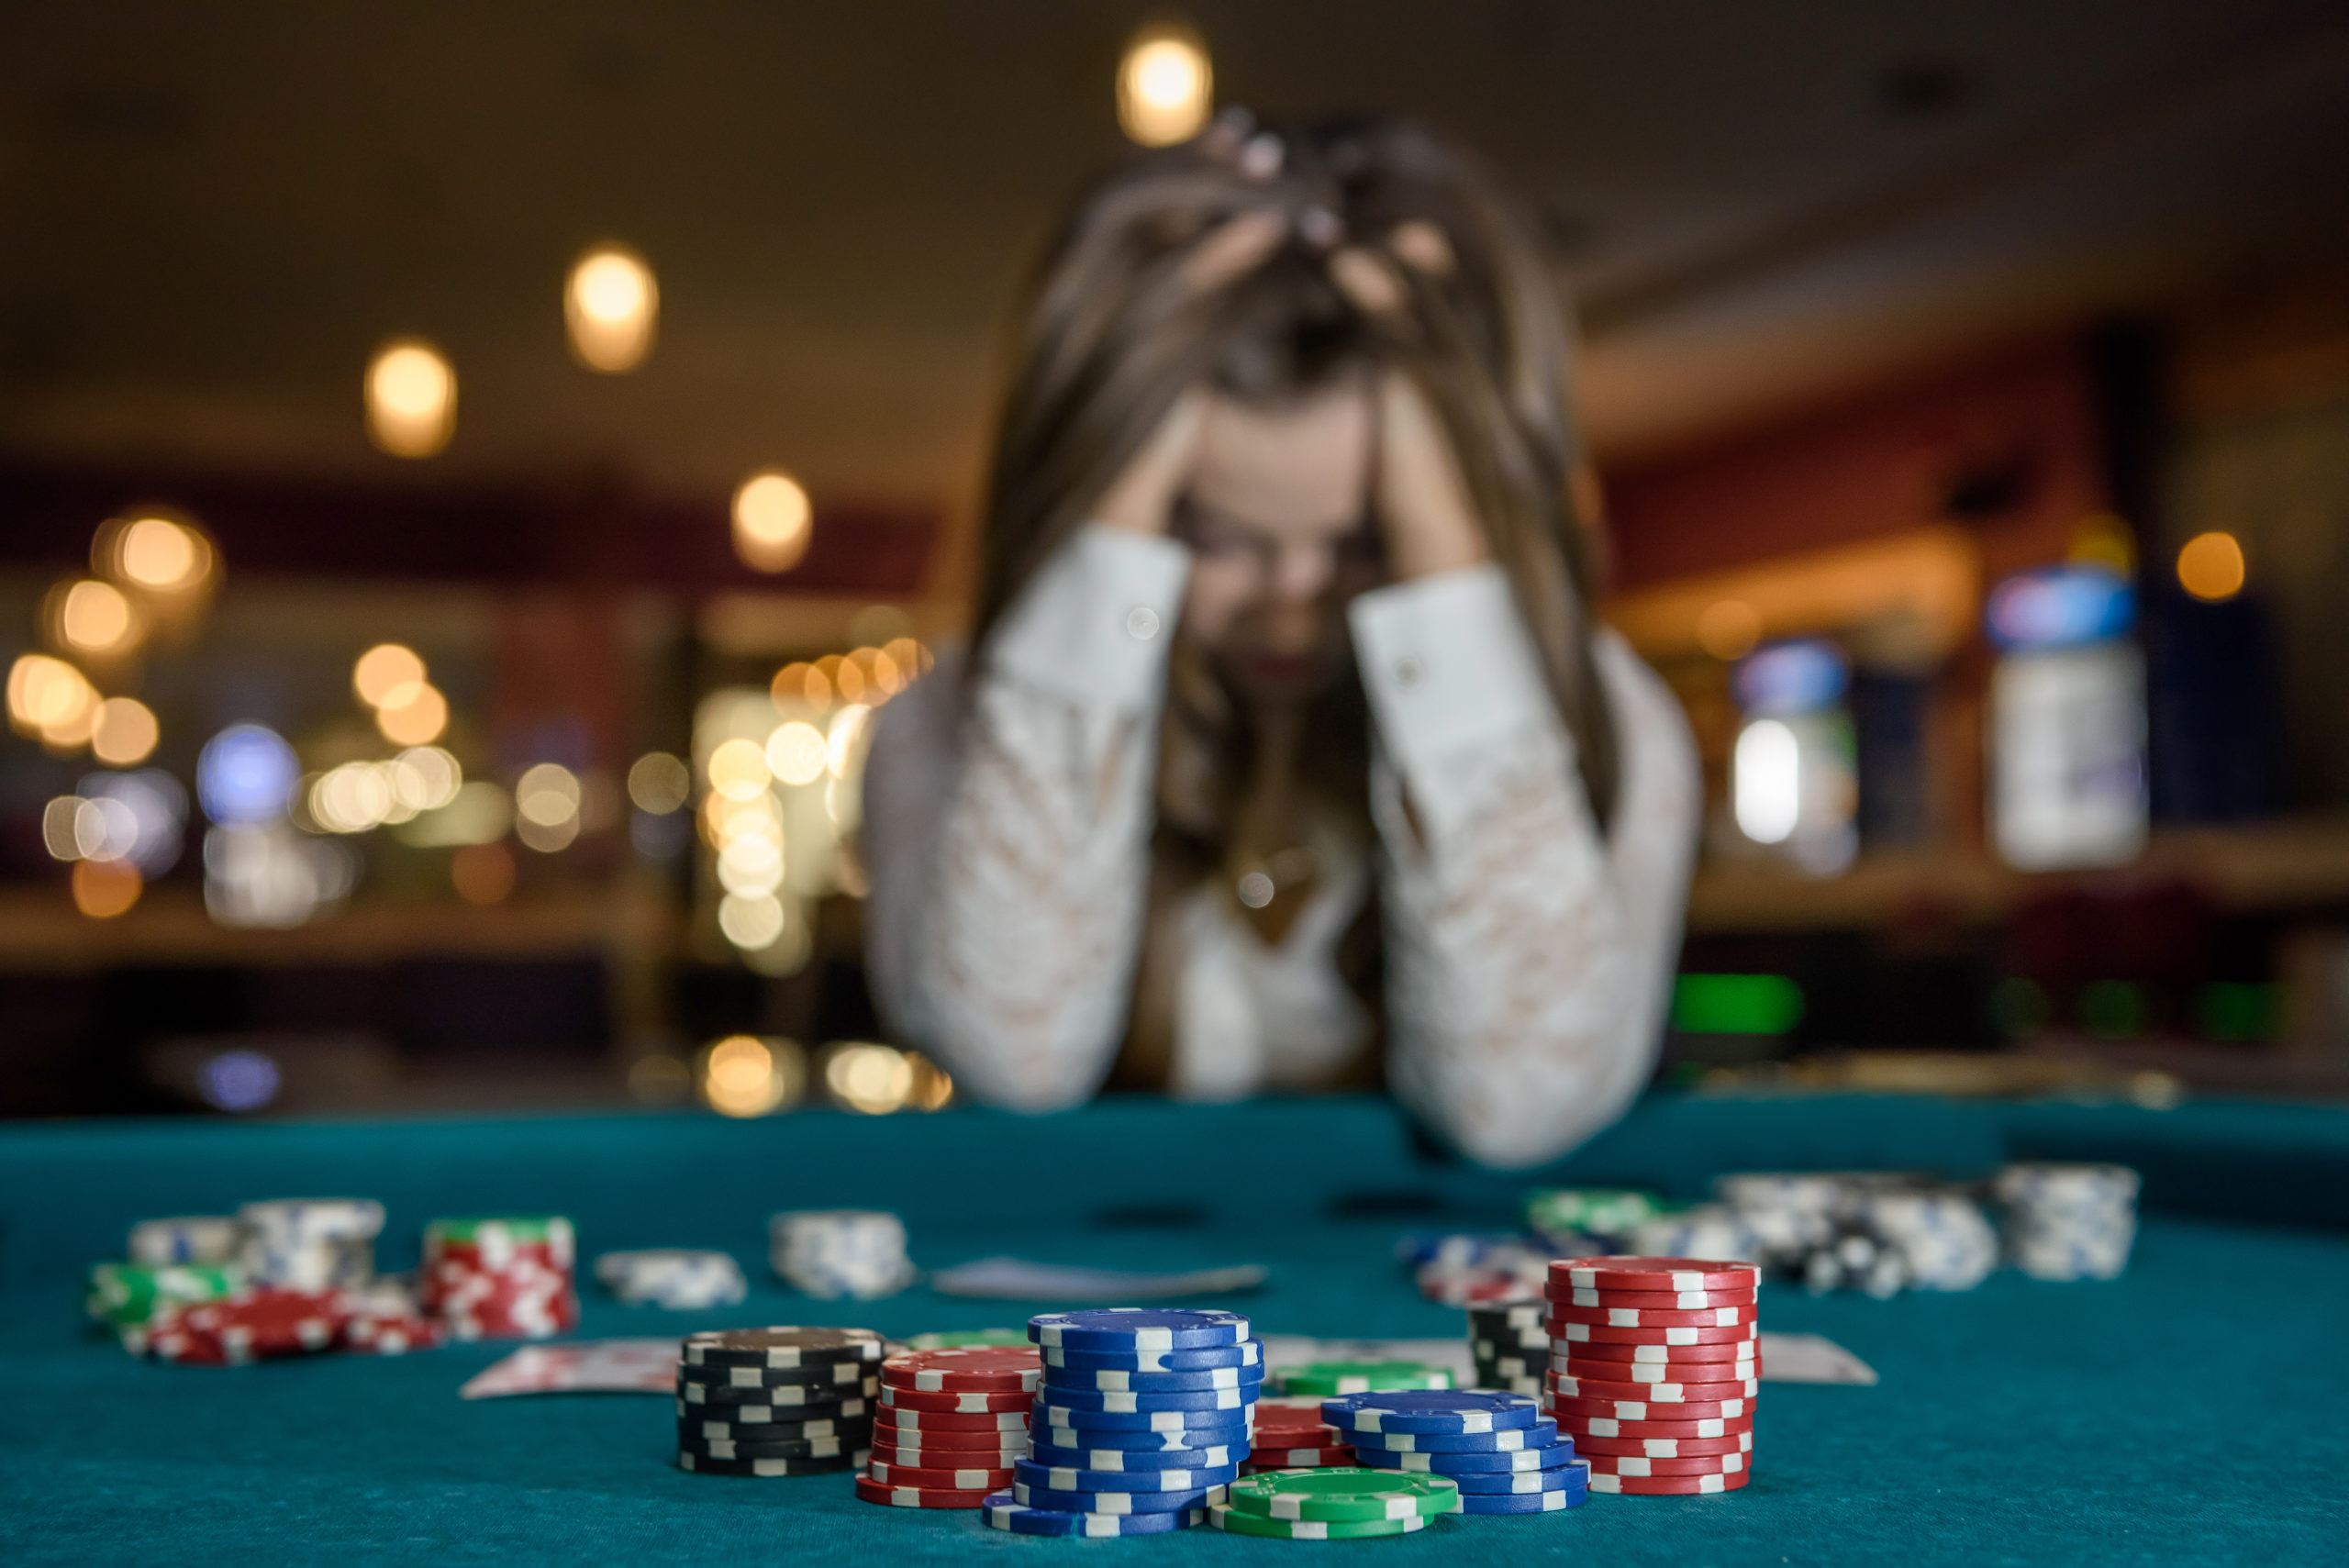 upset-woman-in-casino-sitting-behind-poker-table-stockpack-istock-scaled.jpg